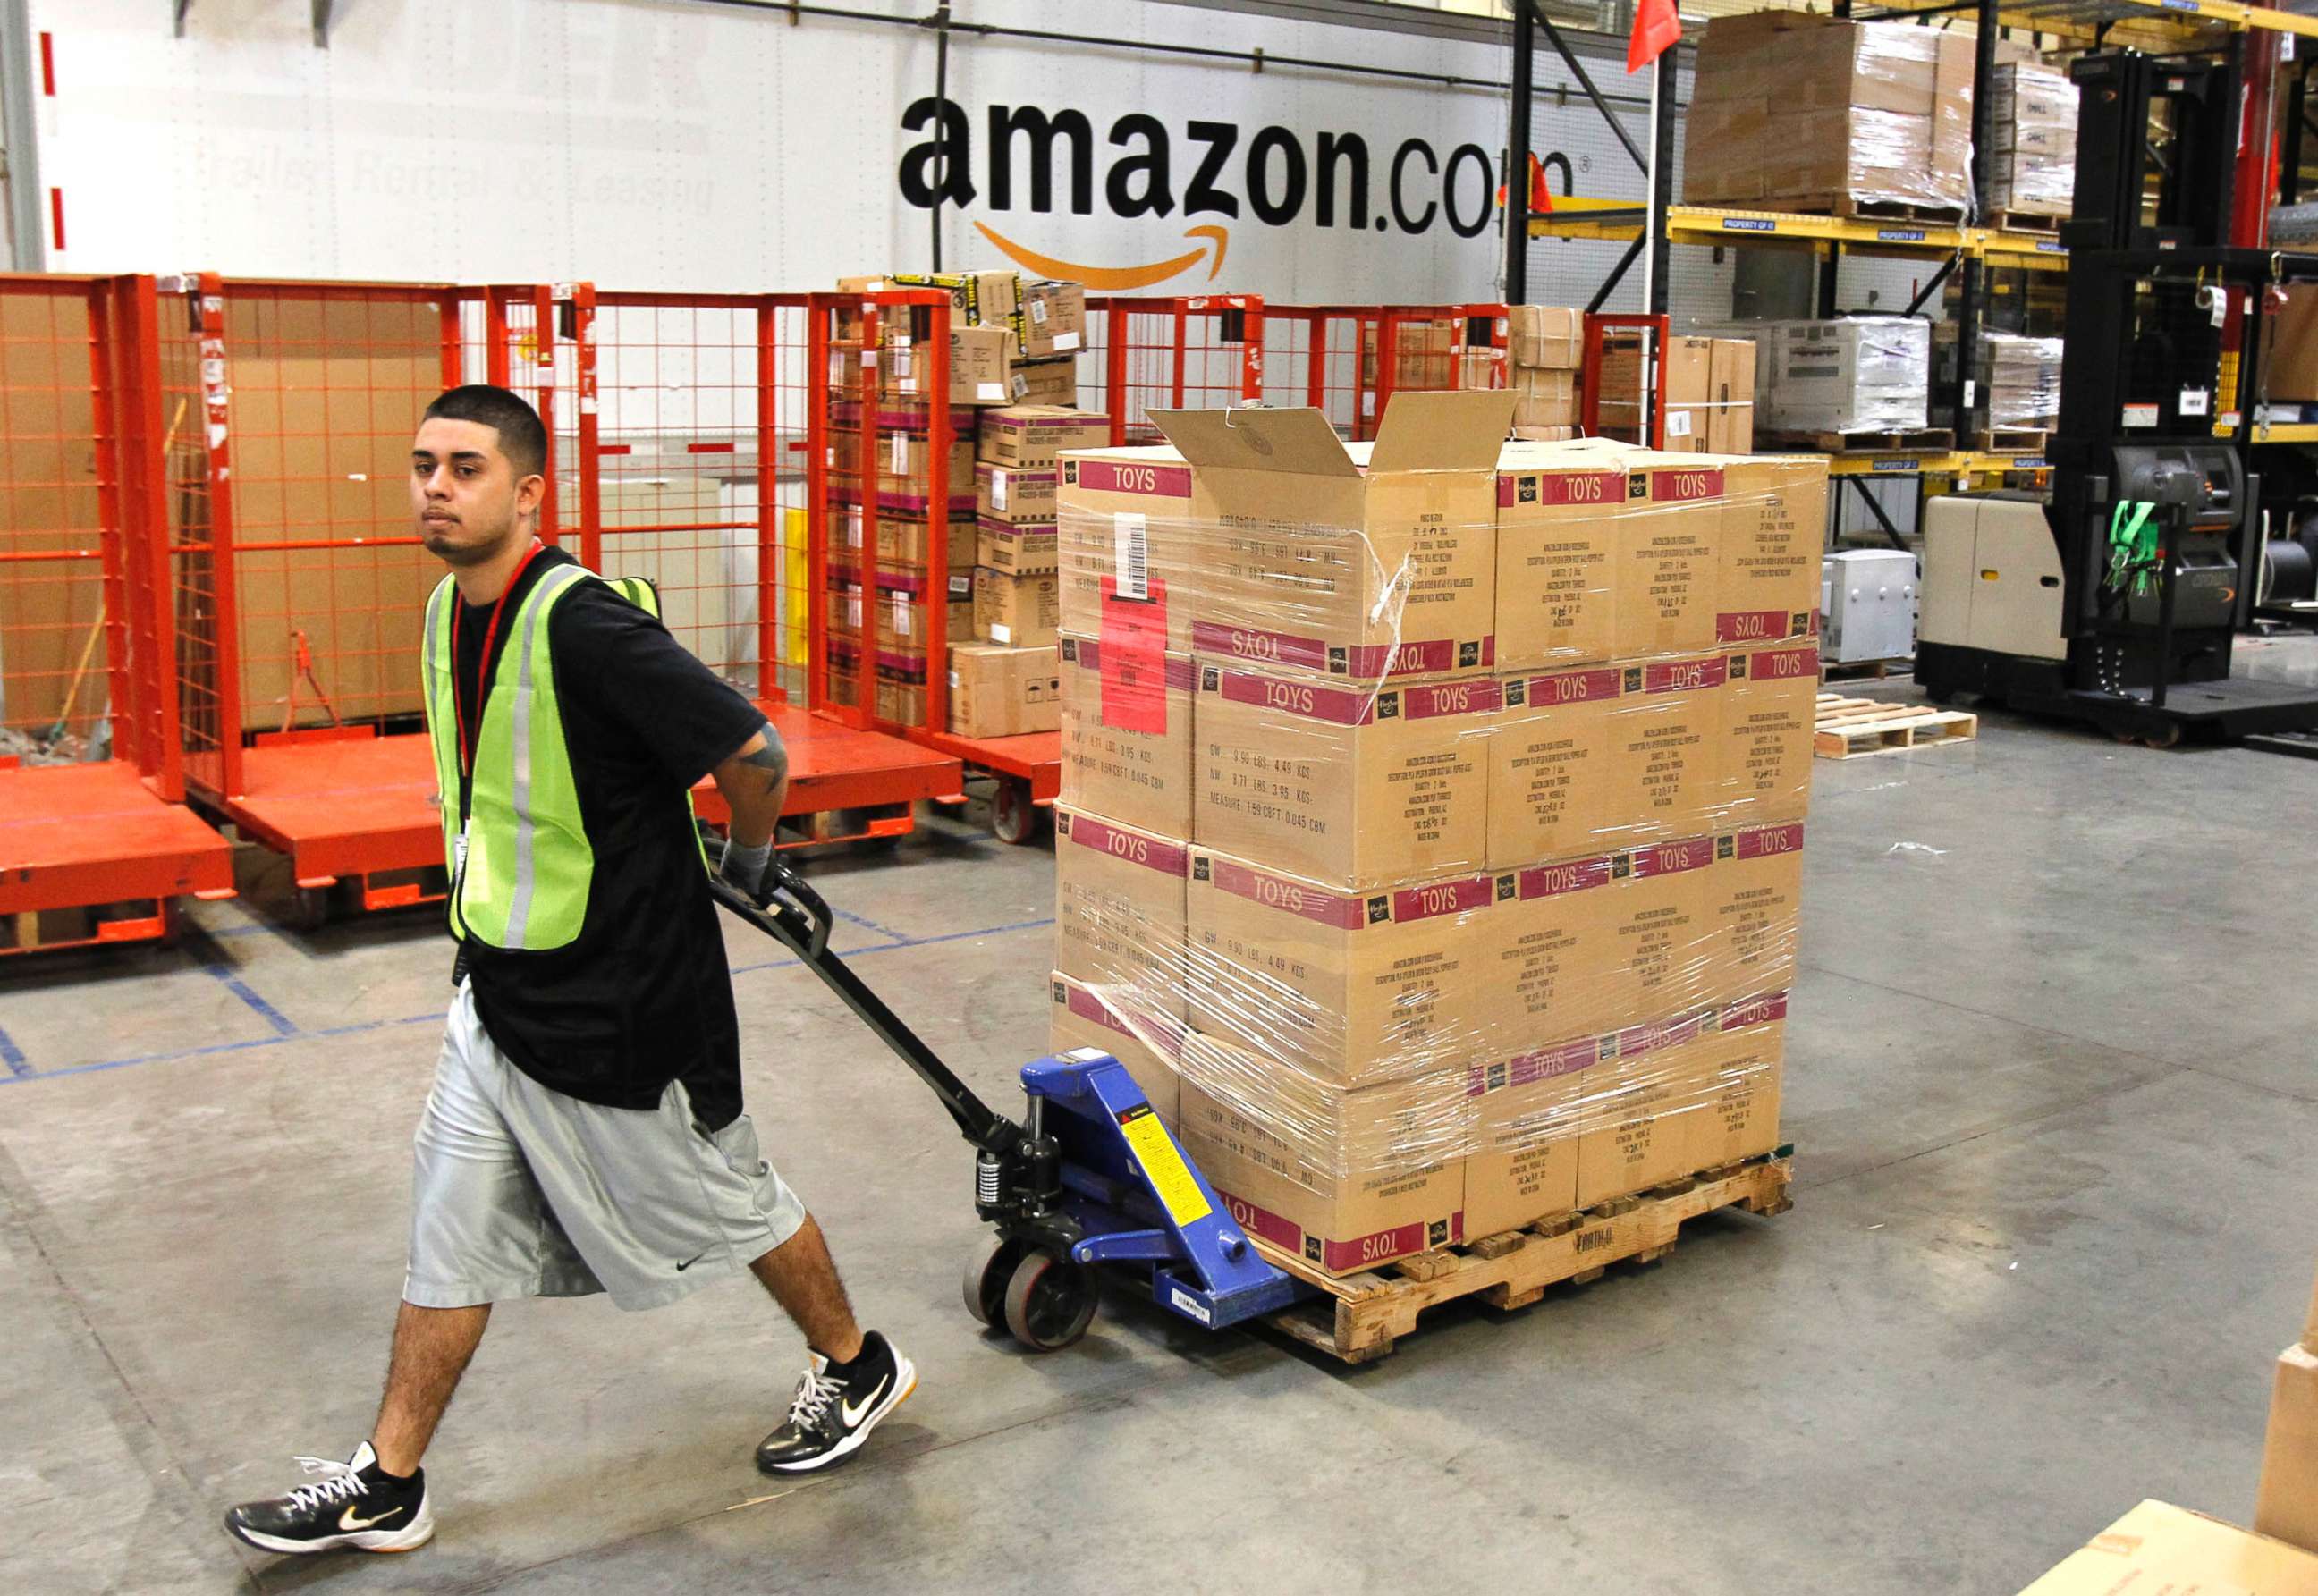 PHOTO: In this file photo, Humberto Manzano, Jr., moves a pallet of goods at an Amazon.com fulfillment center in Phoenix, Nov. 11, 2010.